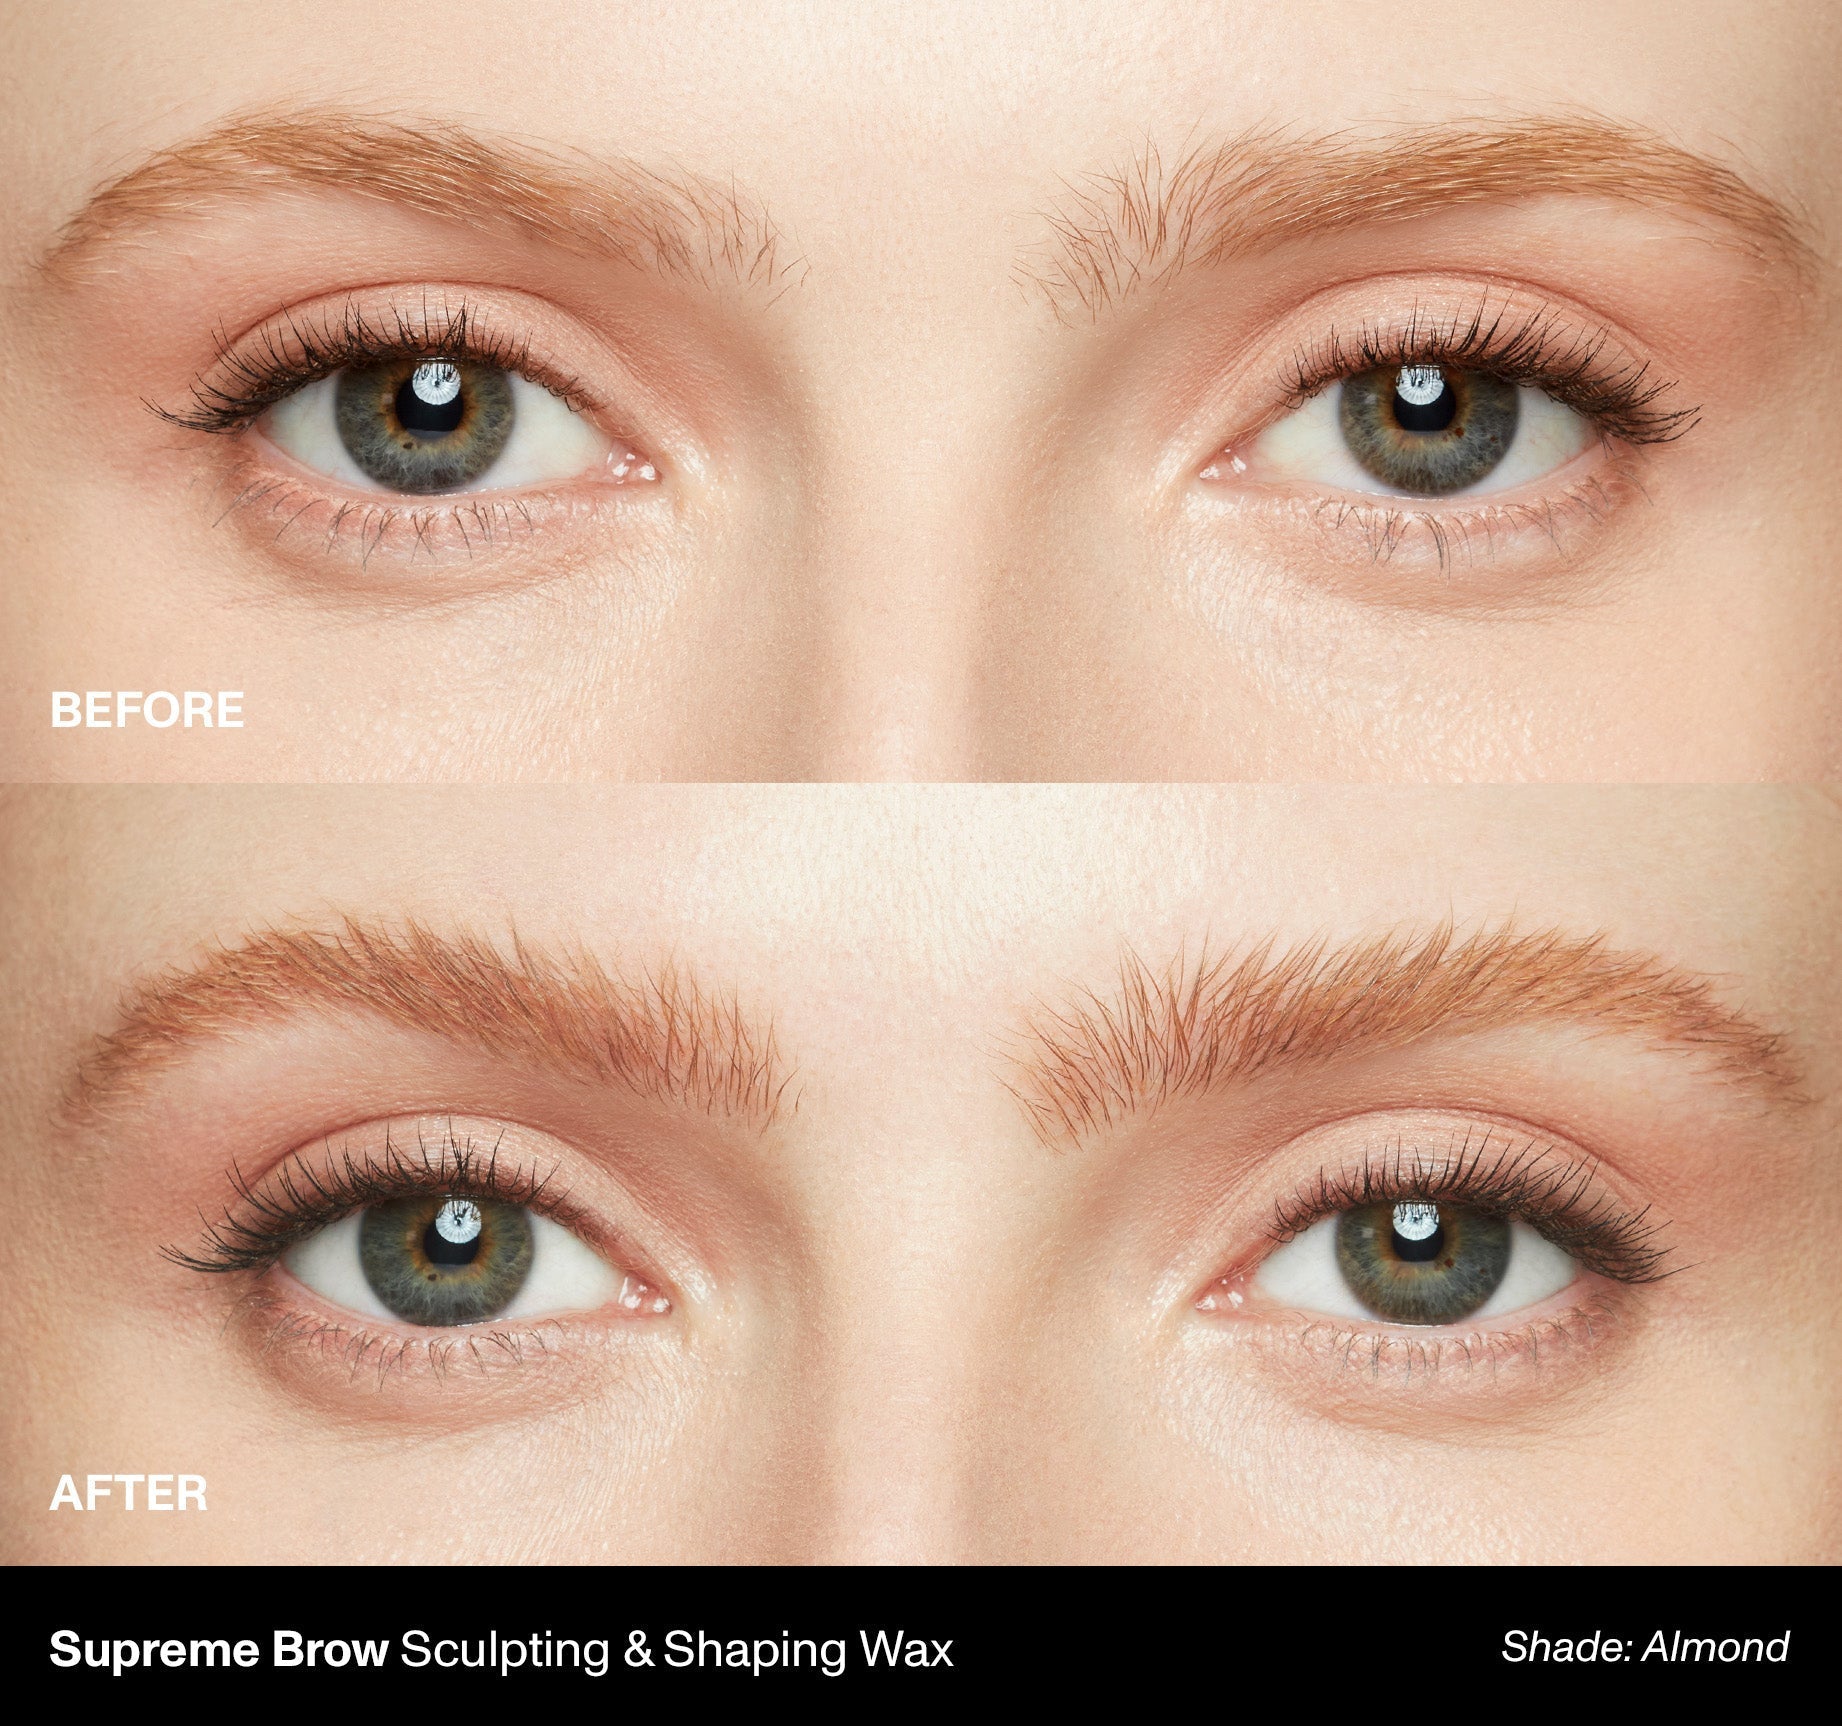 Supreme Brow Sculpting And Shaping Wax - Almond - Image 6